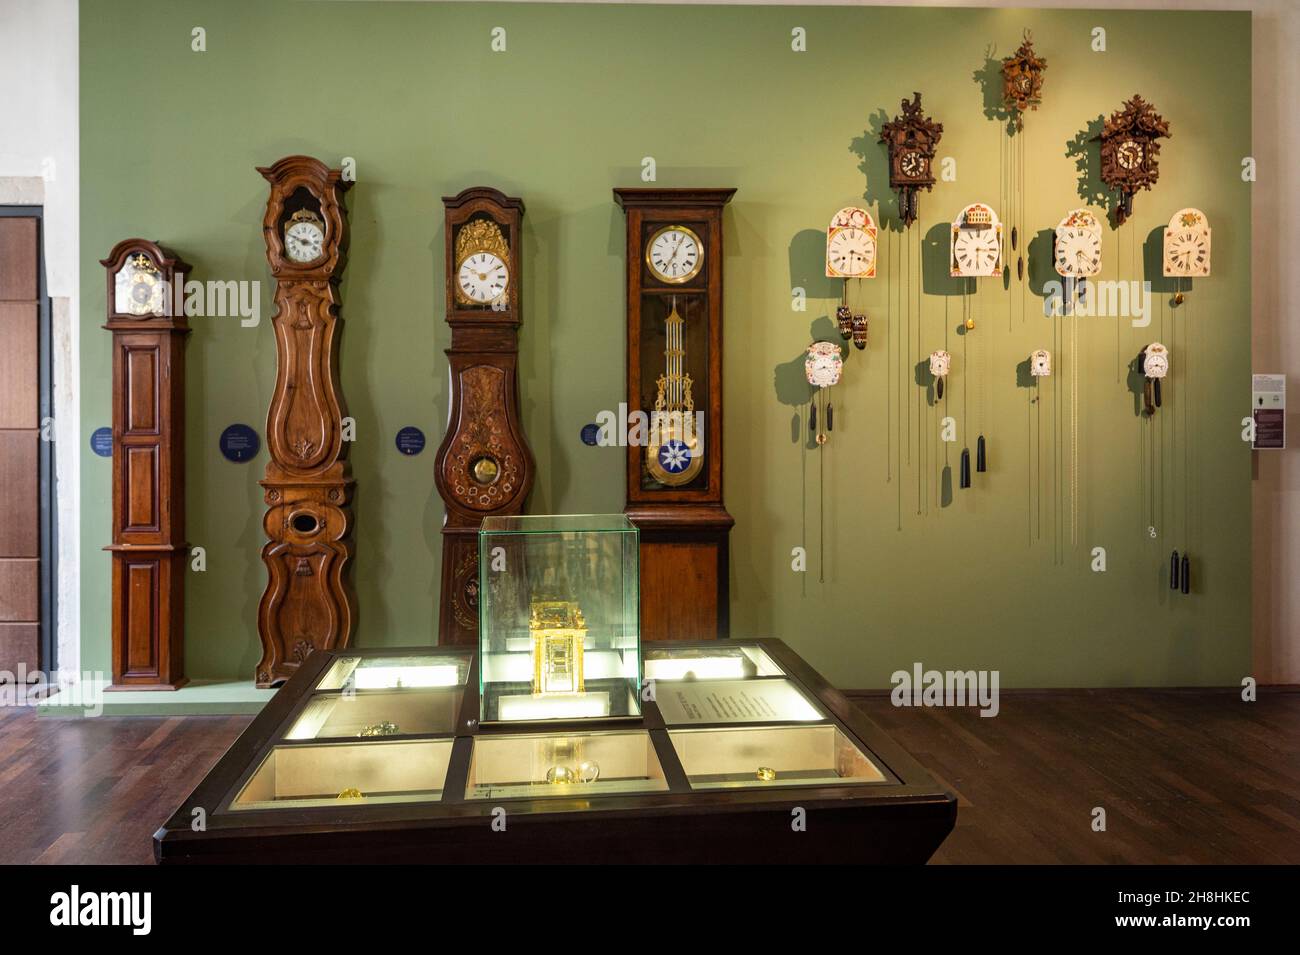 France, Doubs, Besancon, musee Granvelle, exhibition space of the musee du temps, collection of comtoises clocks Stock Photo